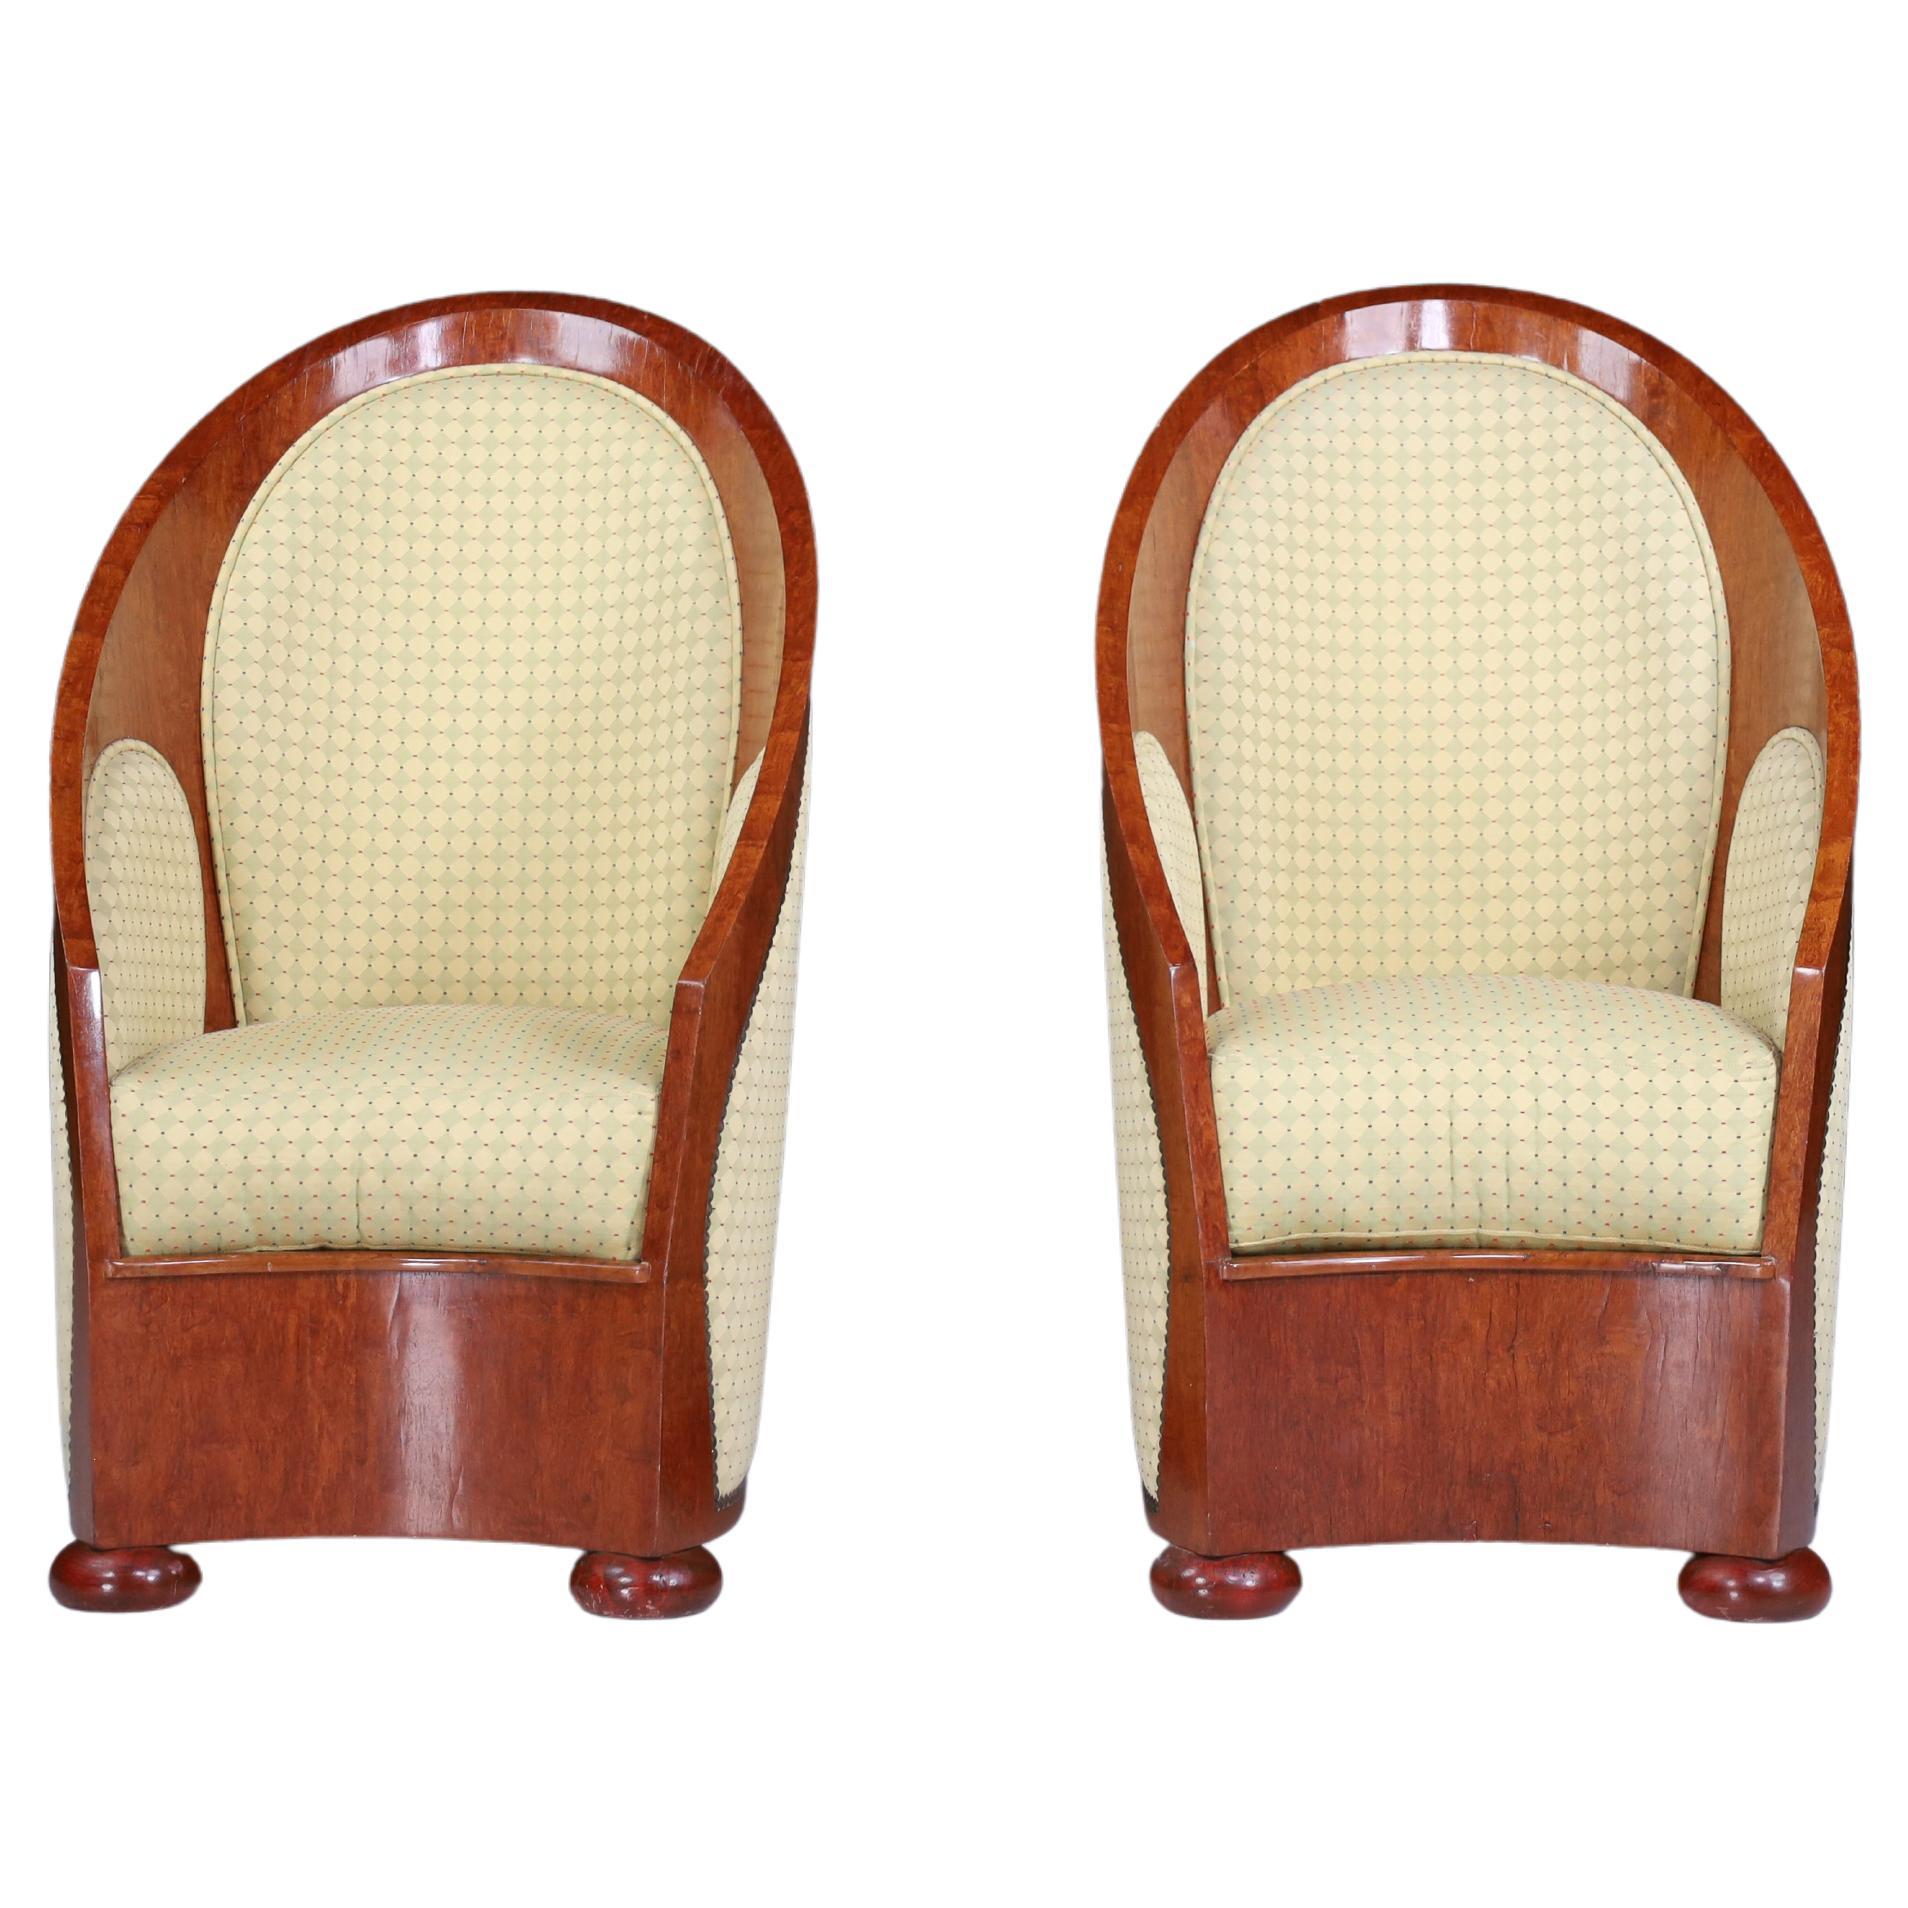 Art Deco Armchairs in Walnut and Original Upholstery, Italy, 1930s For Sale